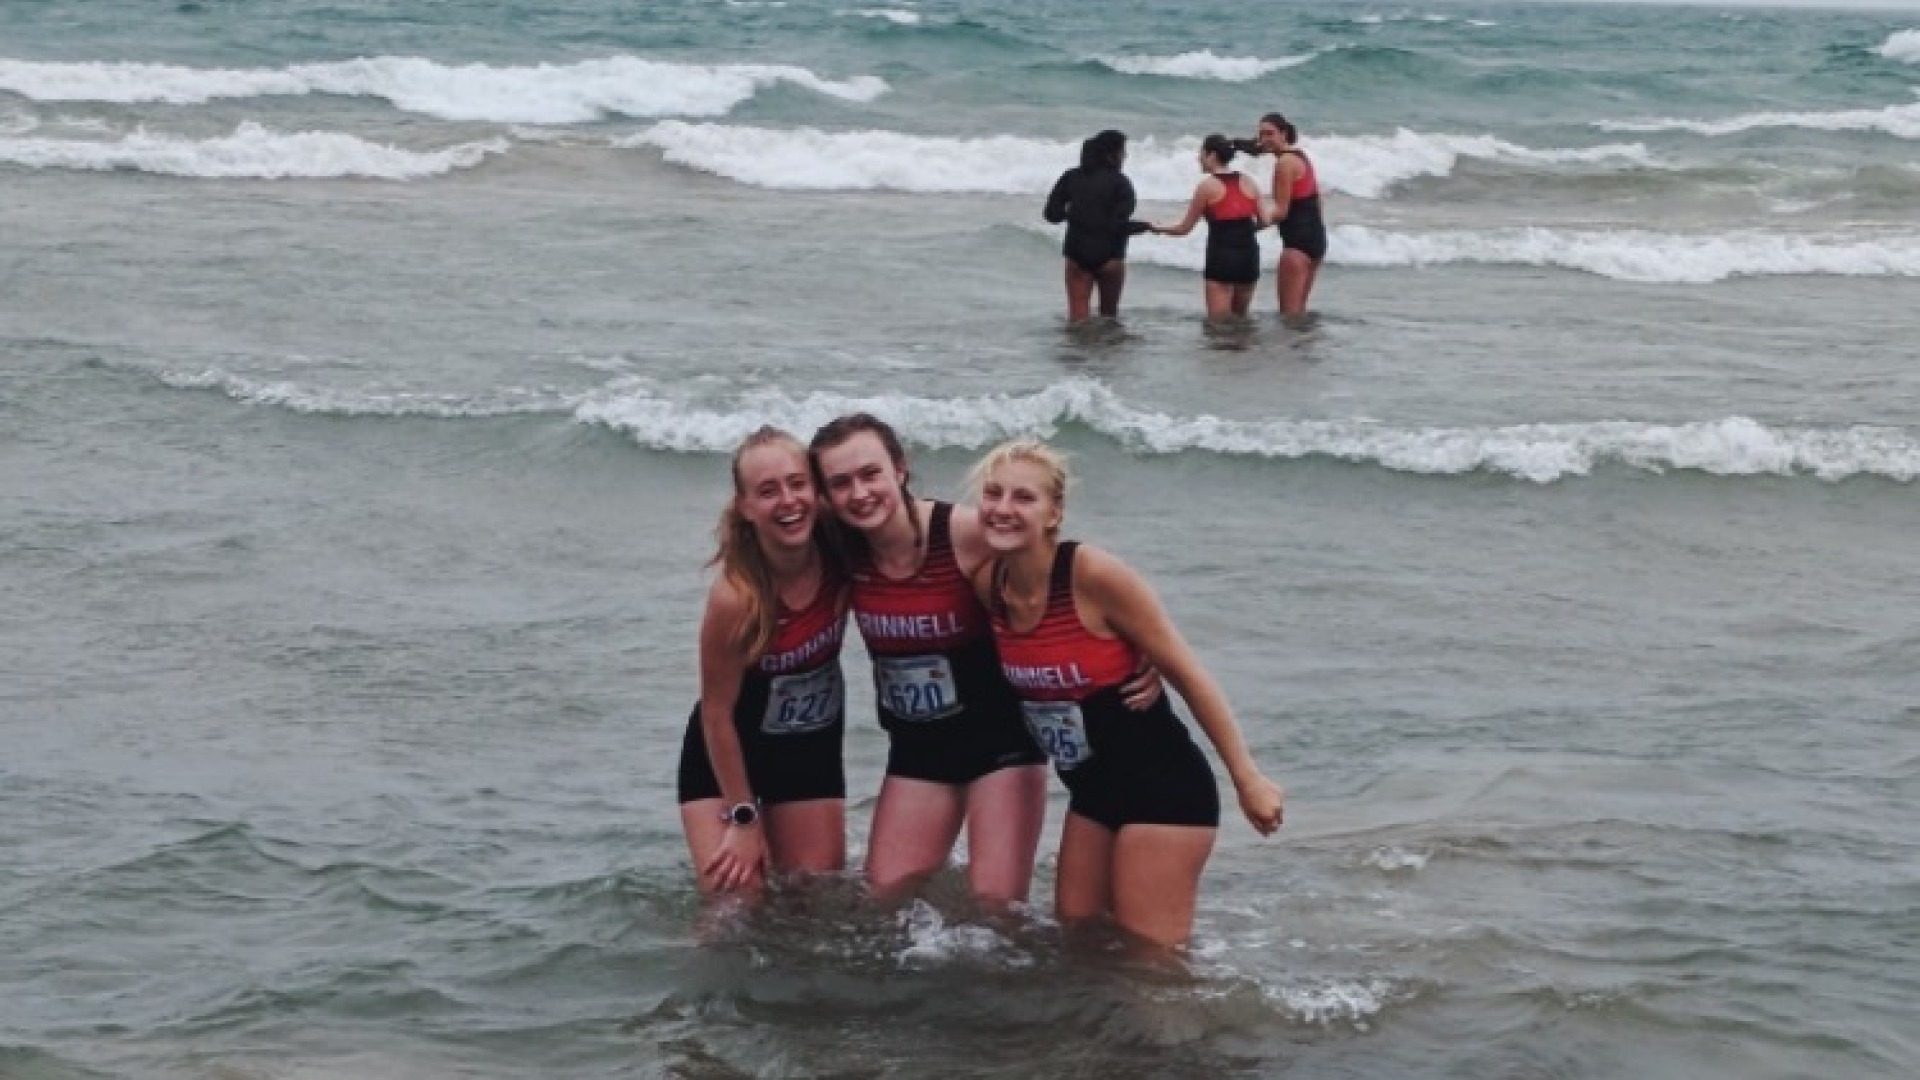 My teammates and I put our arms around each other in the freezing cold Lake Michigan after a XC meet